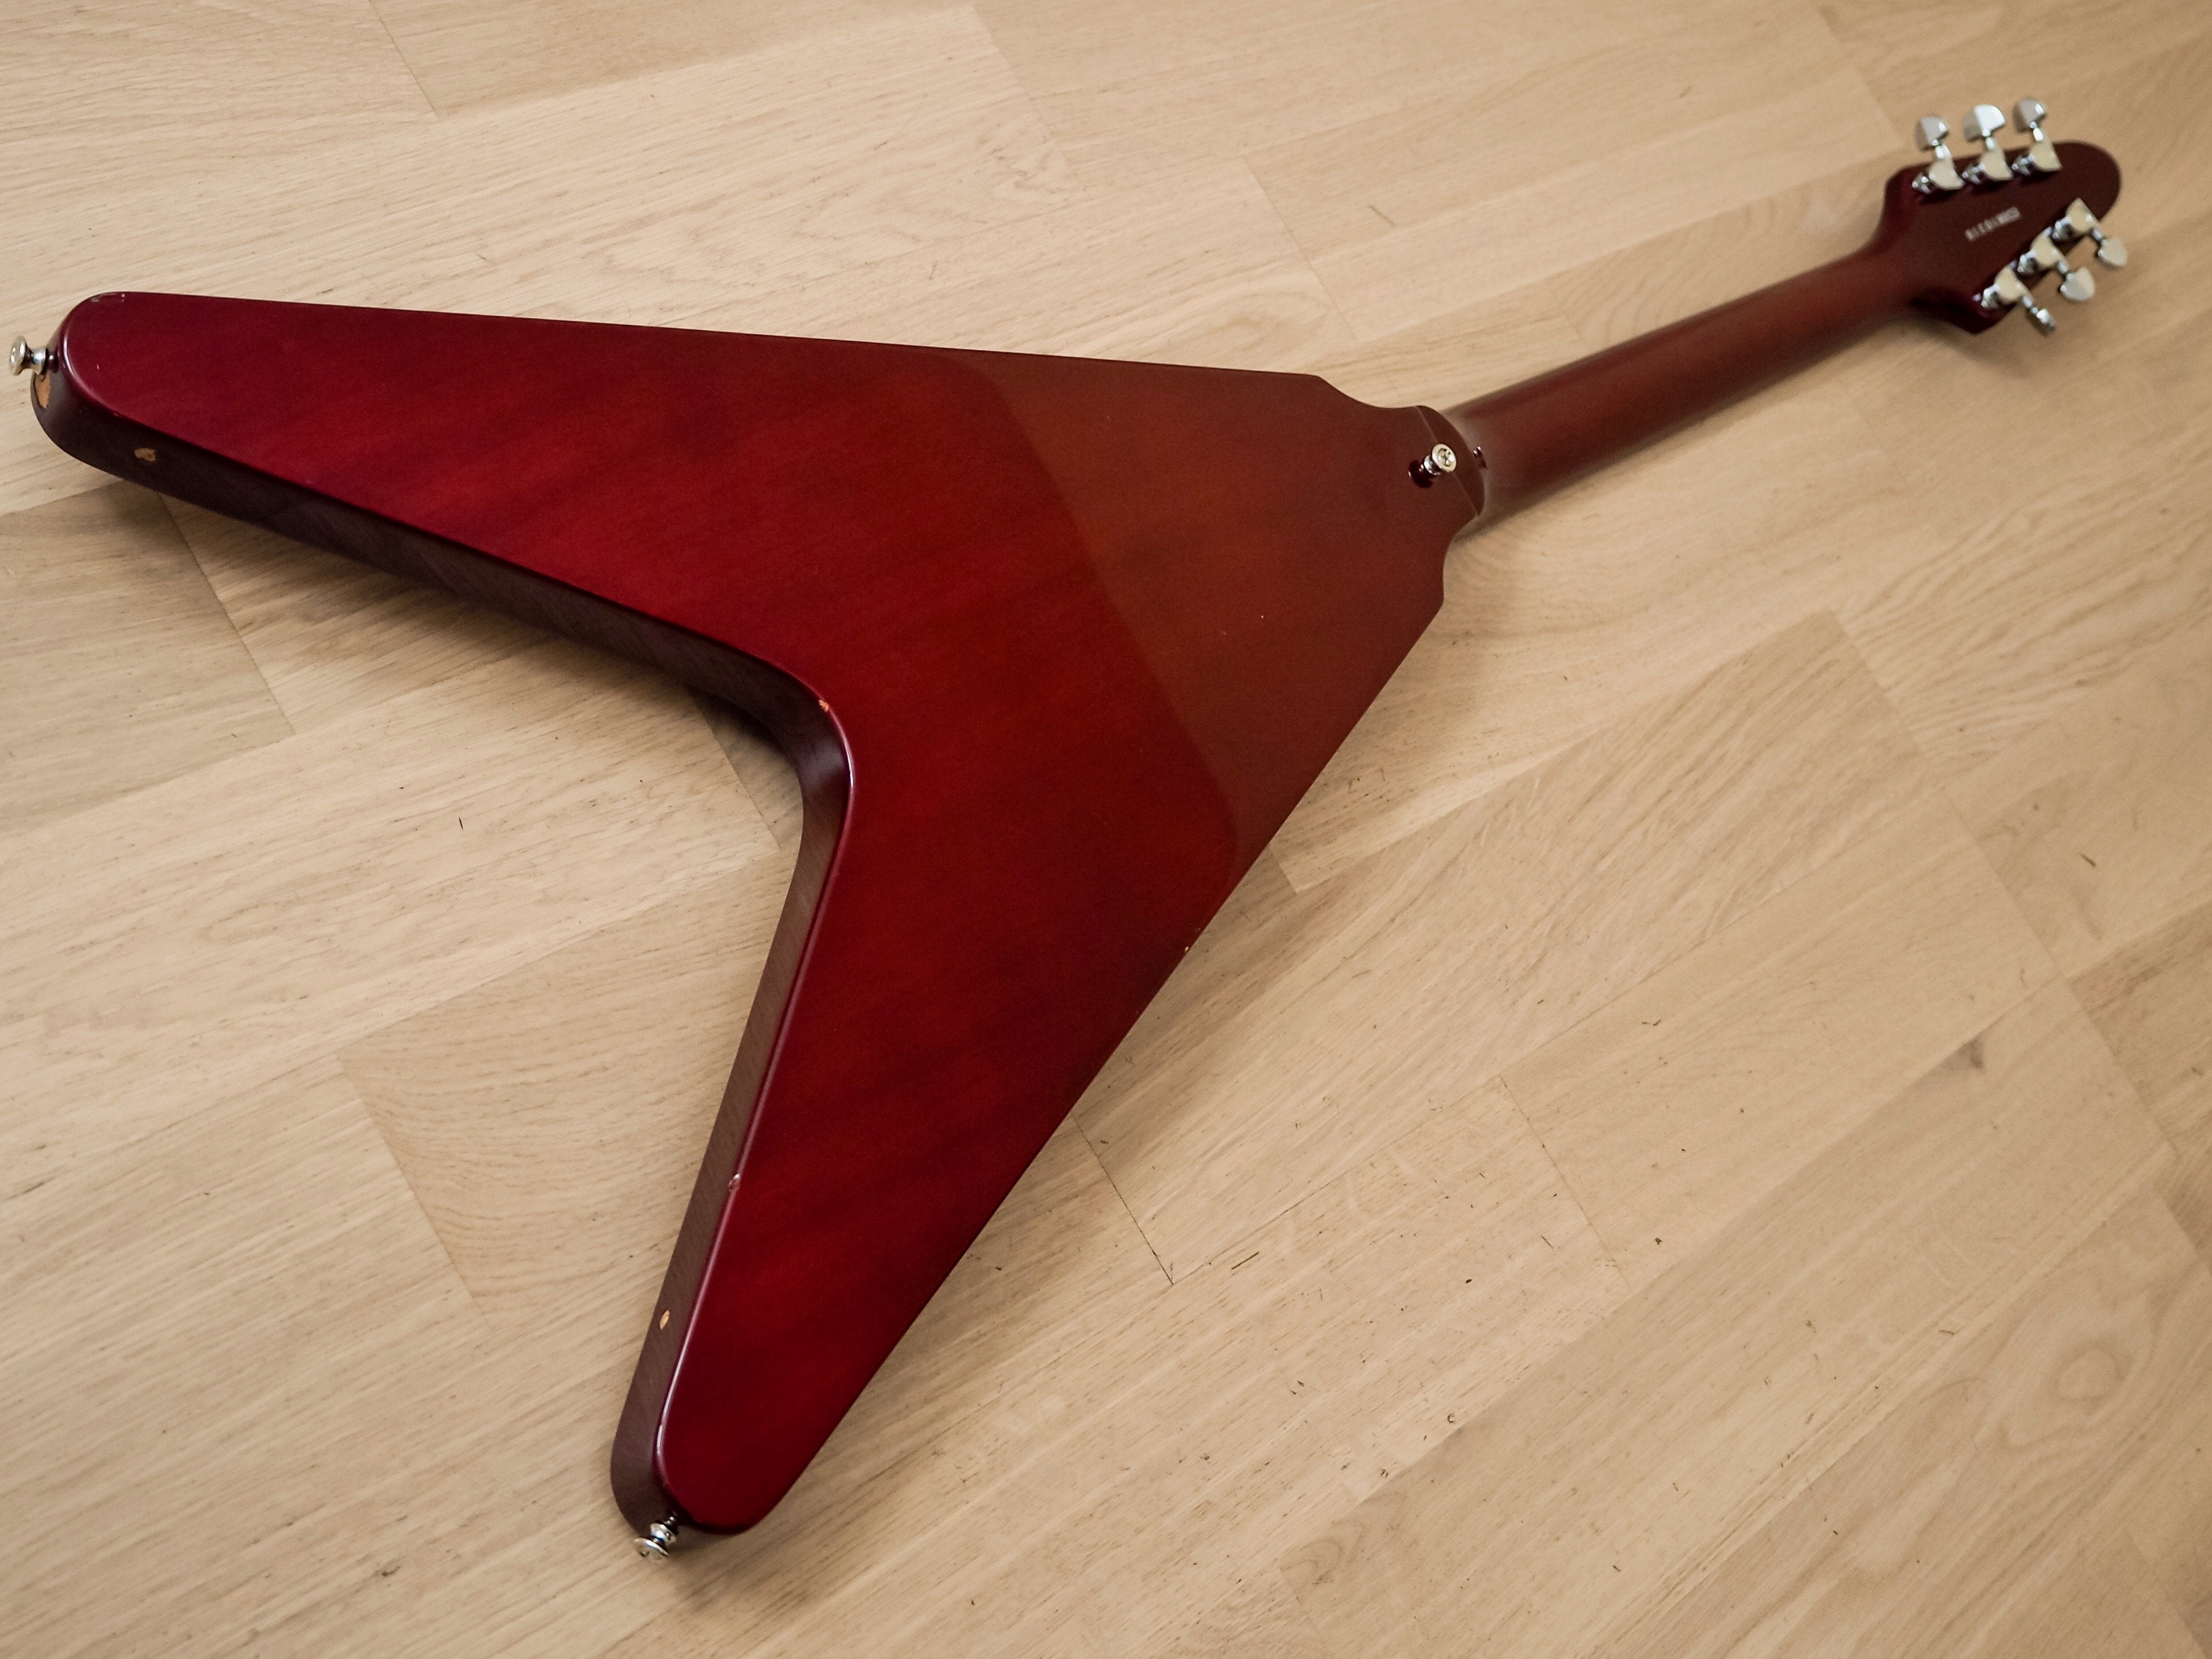 2008 Edwards by ESP E-FV-85D Flying V 67-Style Electric Guitar Cherry w/ USA Duncans, Japan